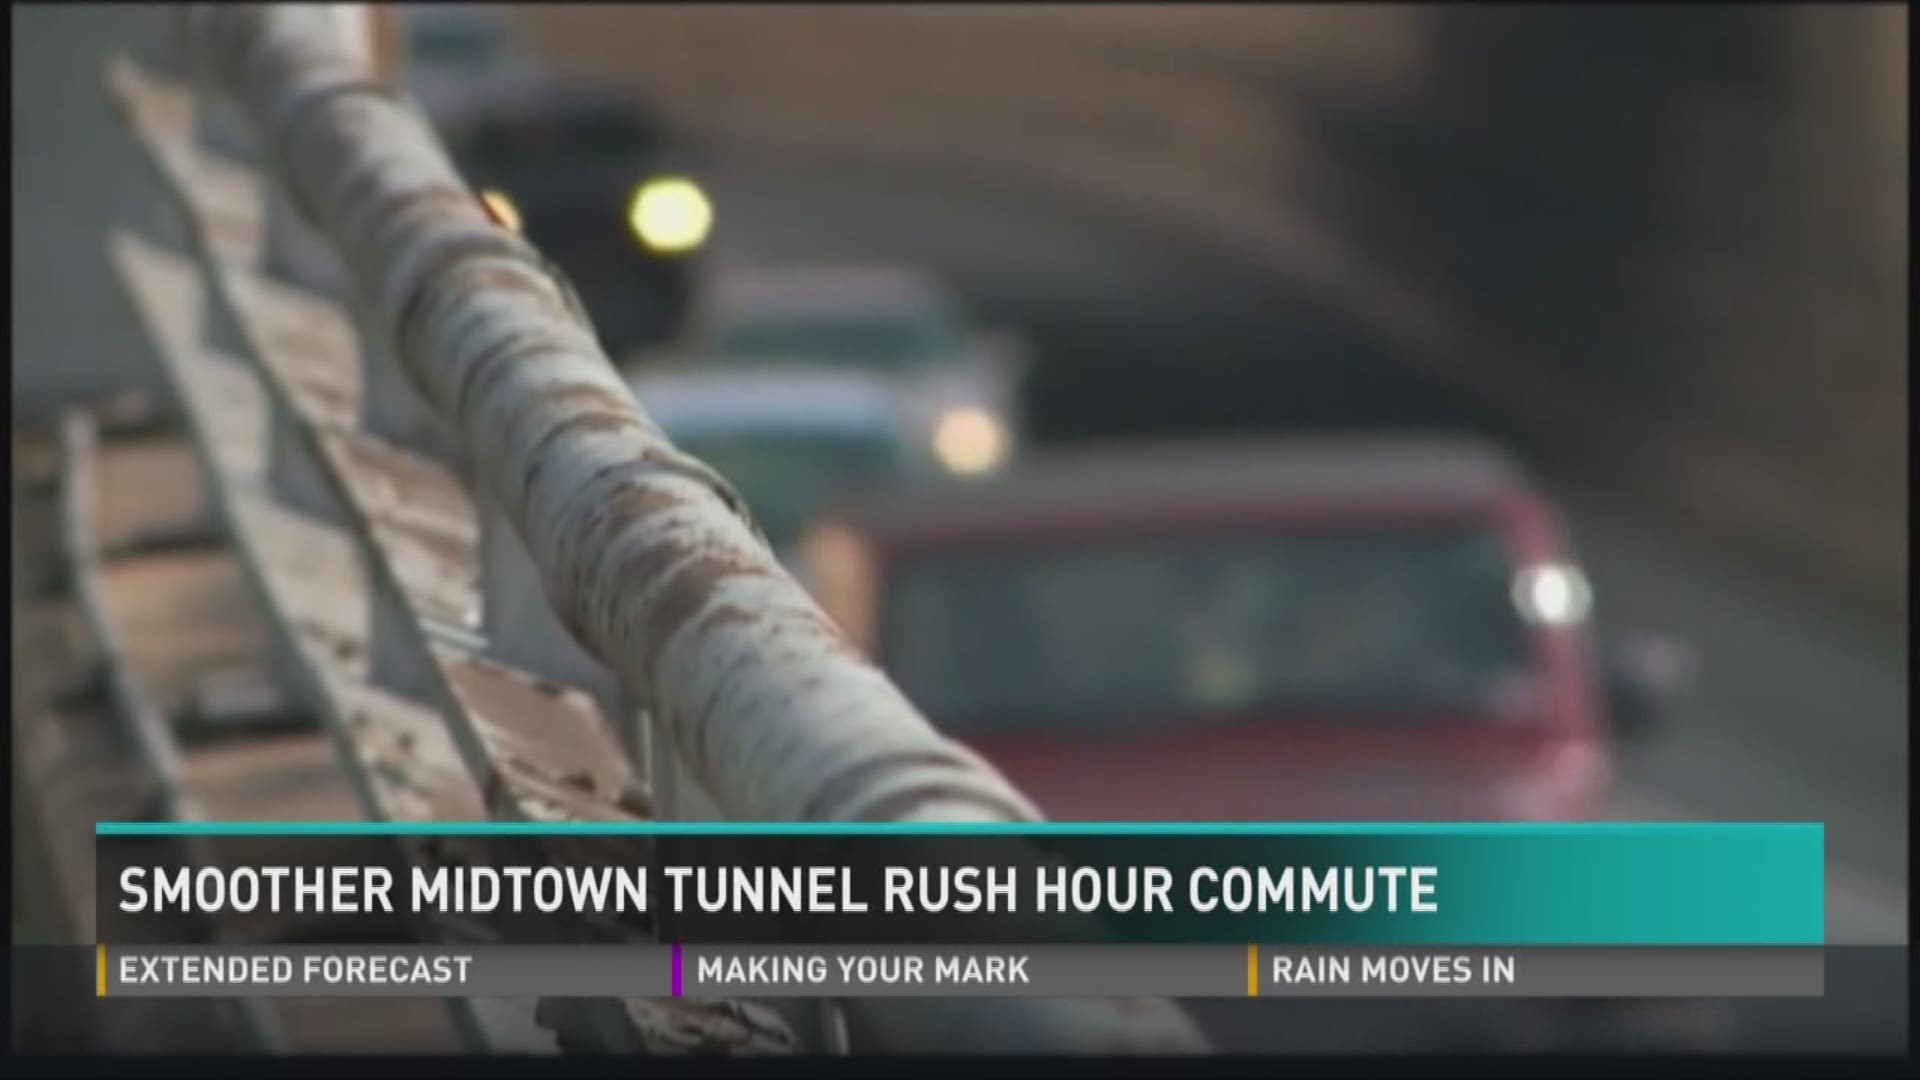 Midtown tunnel rush hour mute being less congested